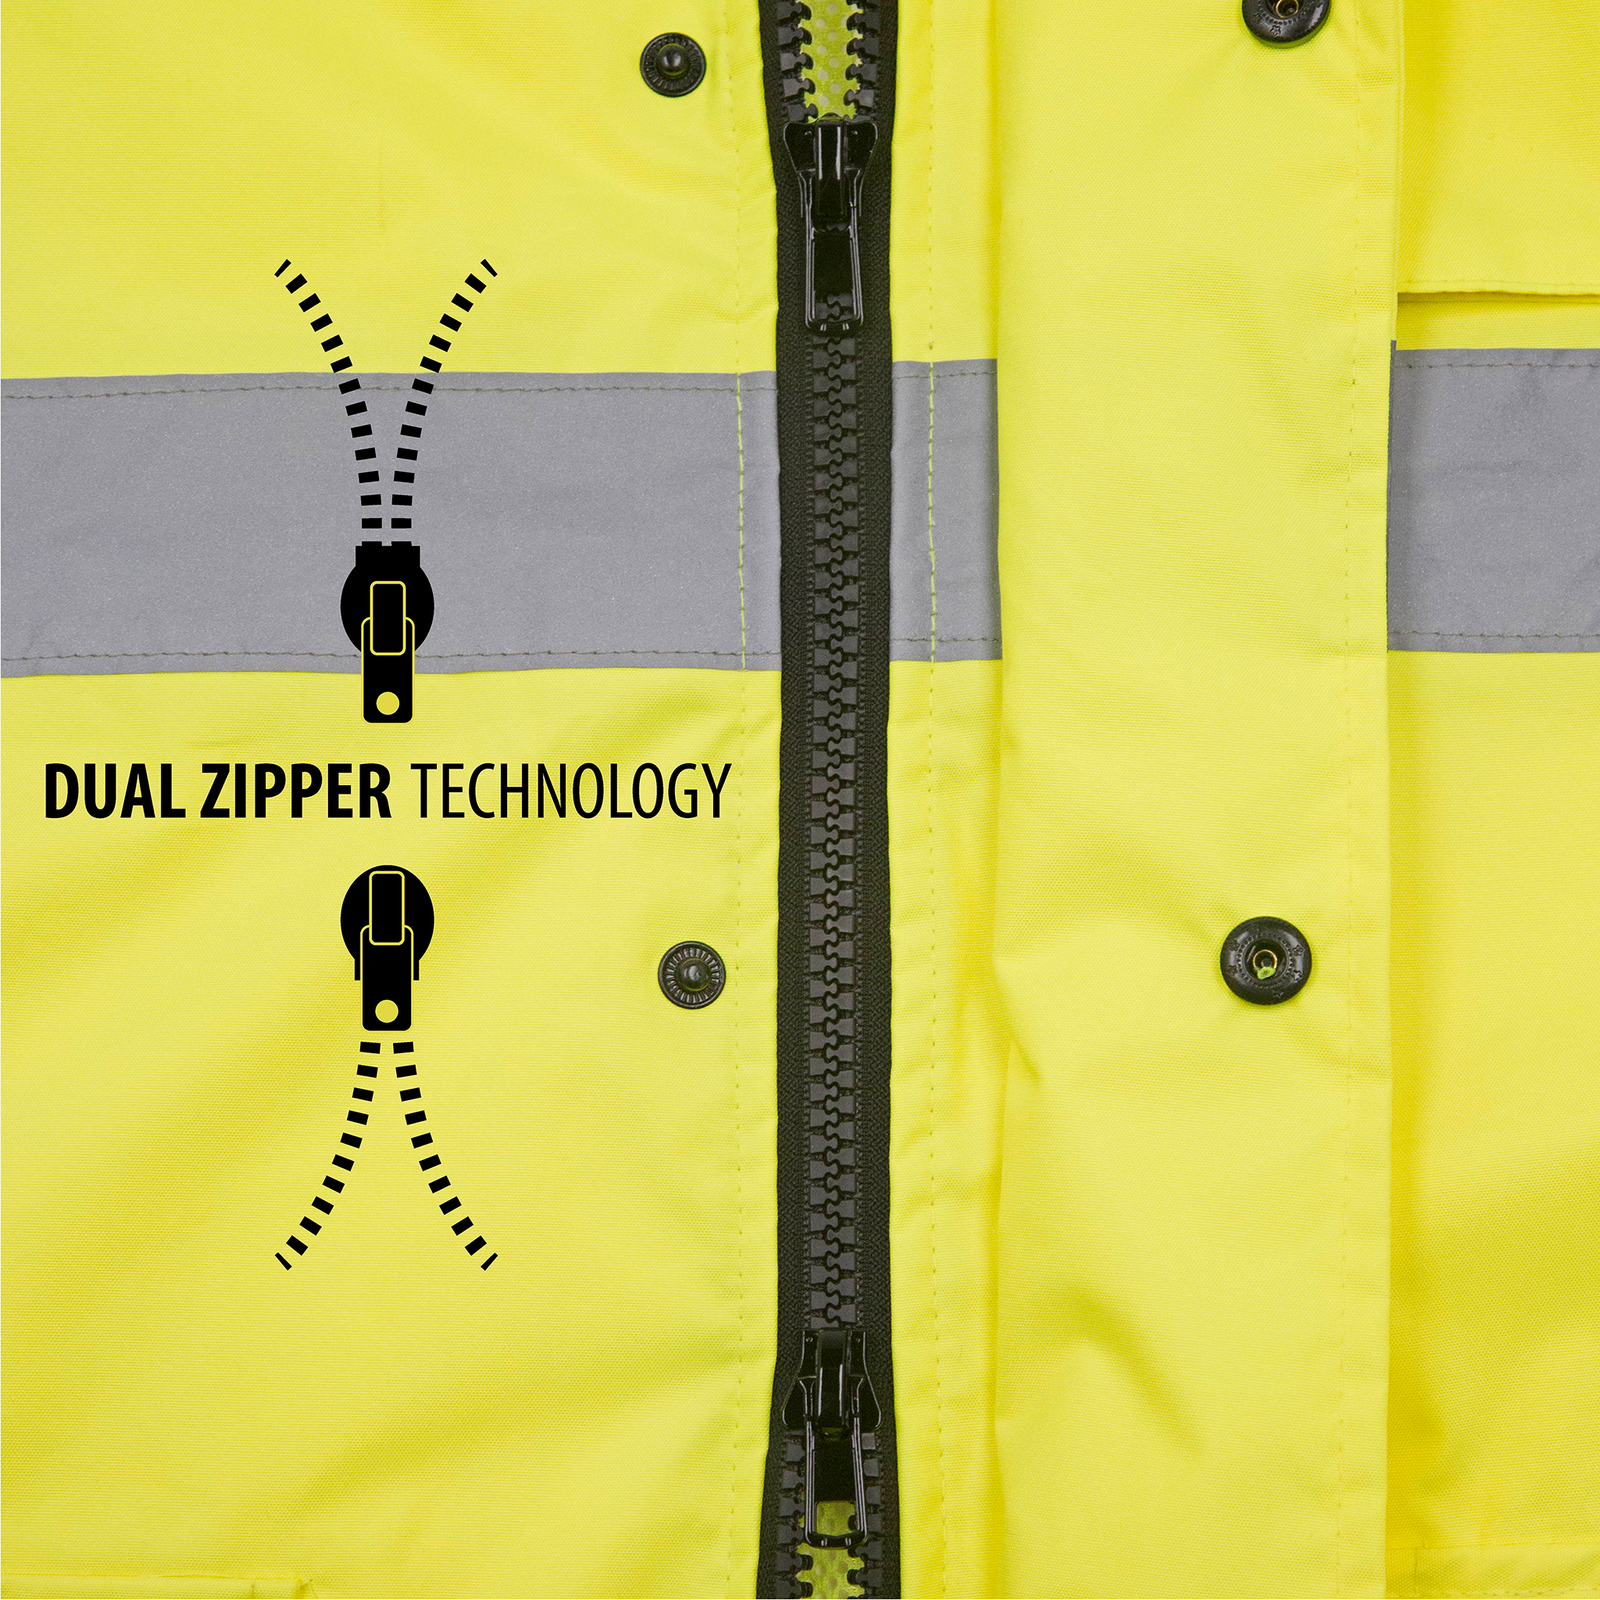 detail of the dual zipper technology that comes with the jorestech yellow and black rain jacket. Zipper open in both directions form top to bottom and from bottom to top 